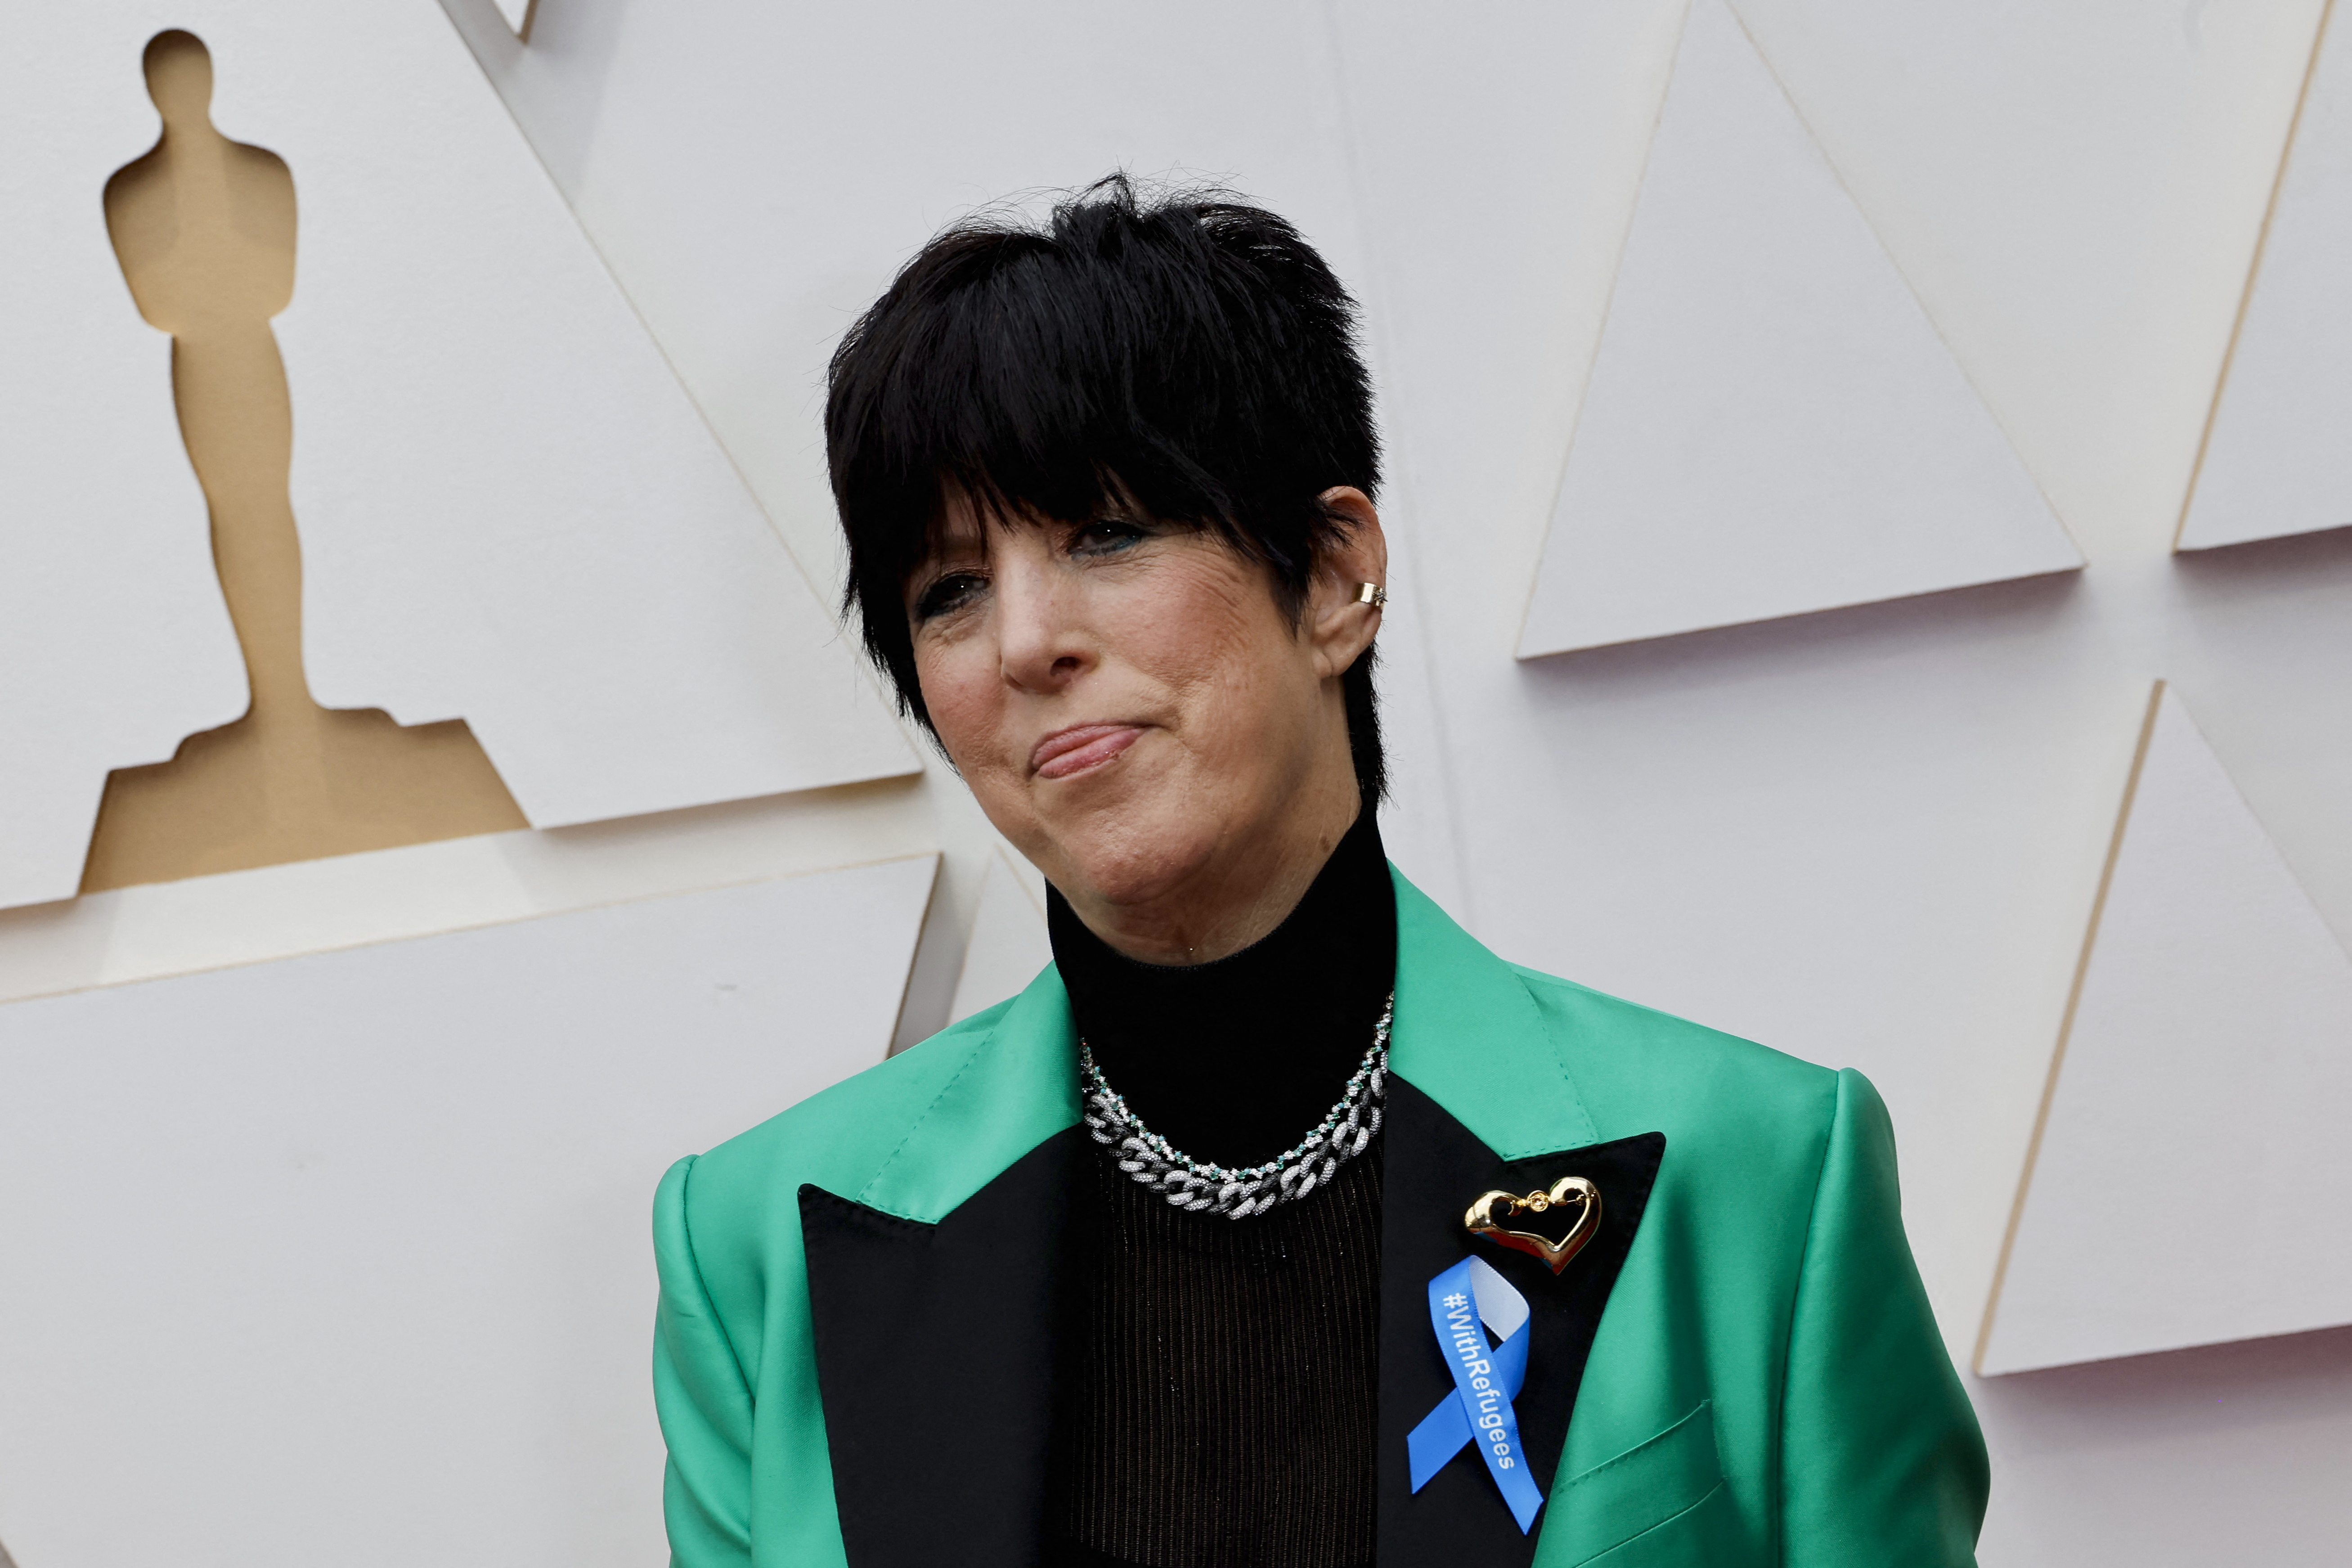 Diane Warren wears a ribbon reading "With Refugees" supporting global refugees as she poses on the red carpet during the Oscars arrivals at the 94th Academy Awards in Hollywood, Los Angeles, California, U.S., March 27, 2022. REUTERS/Eric Gaillard